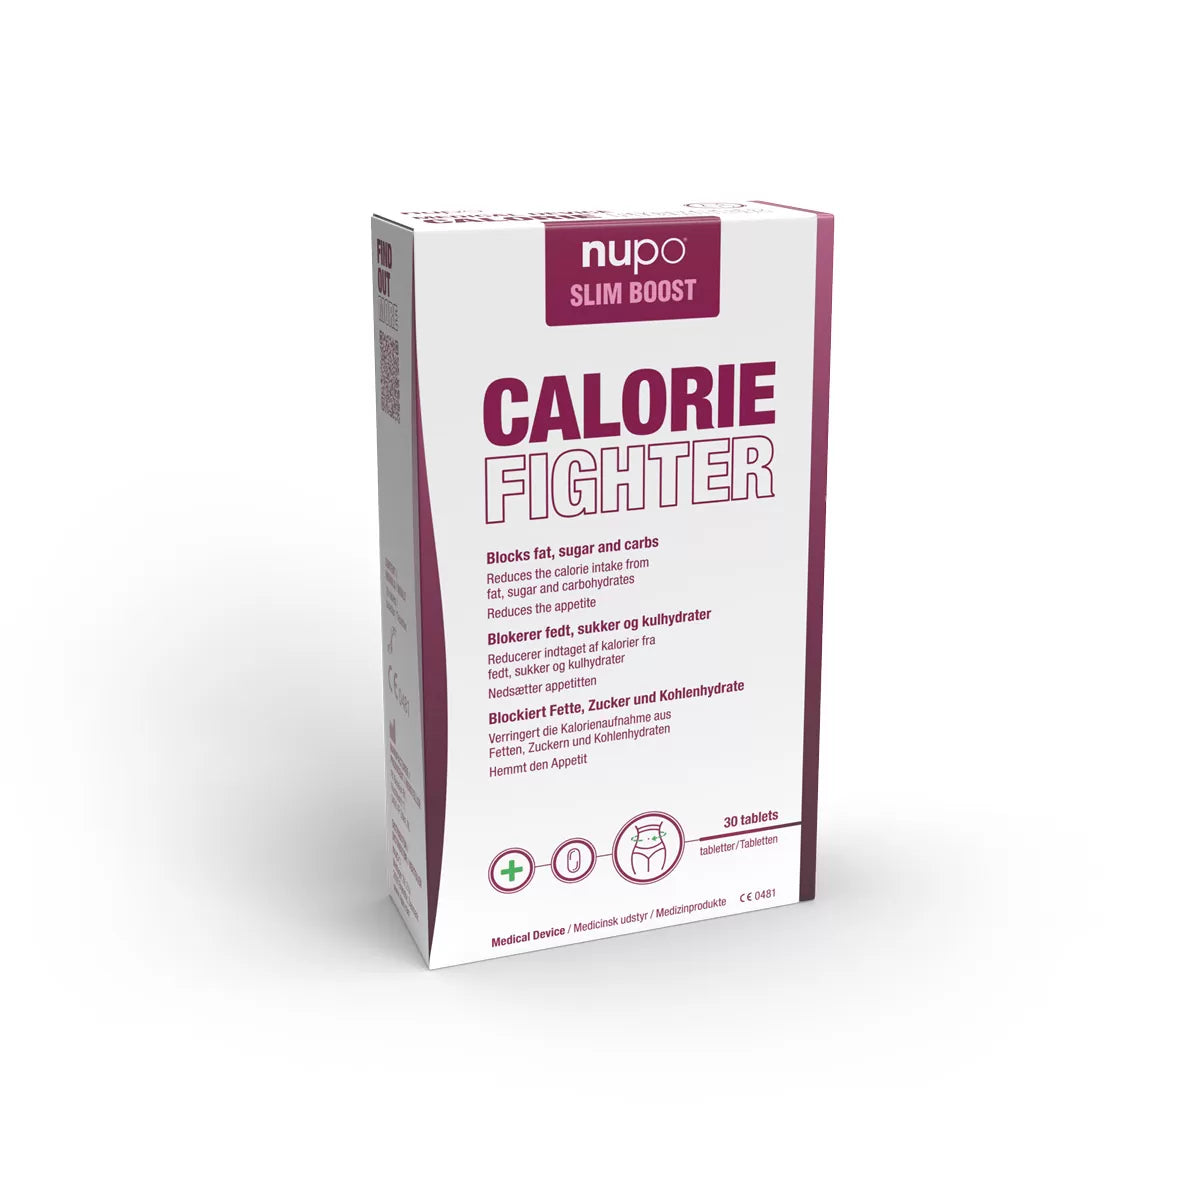 Se Nupo Slim Boost+ Calorie Fighter (15 stk) hos Muscle House